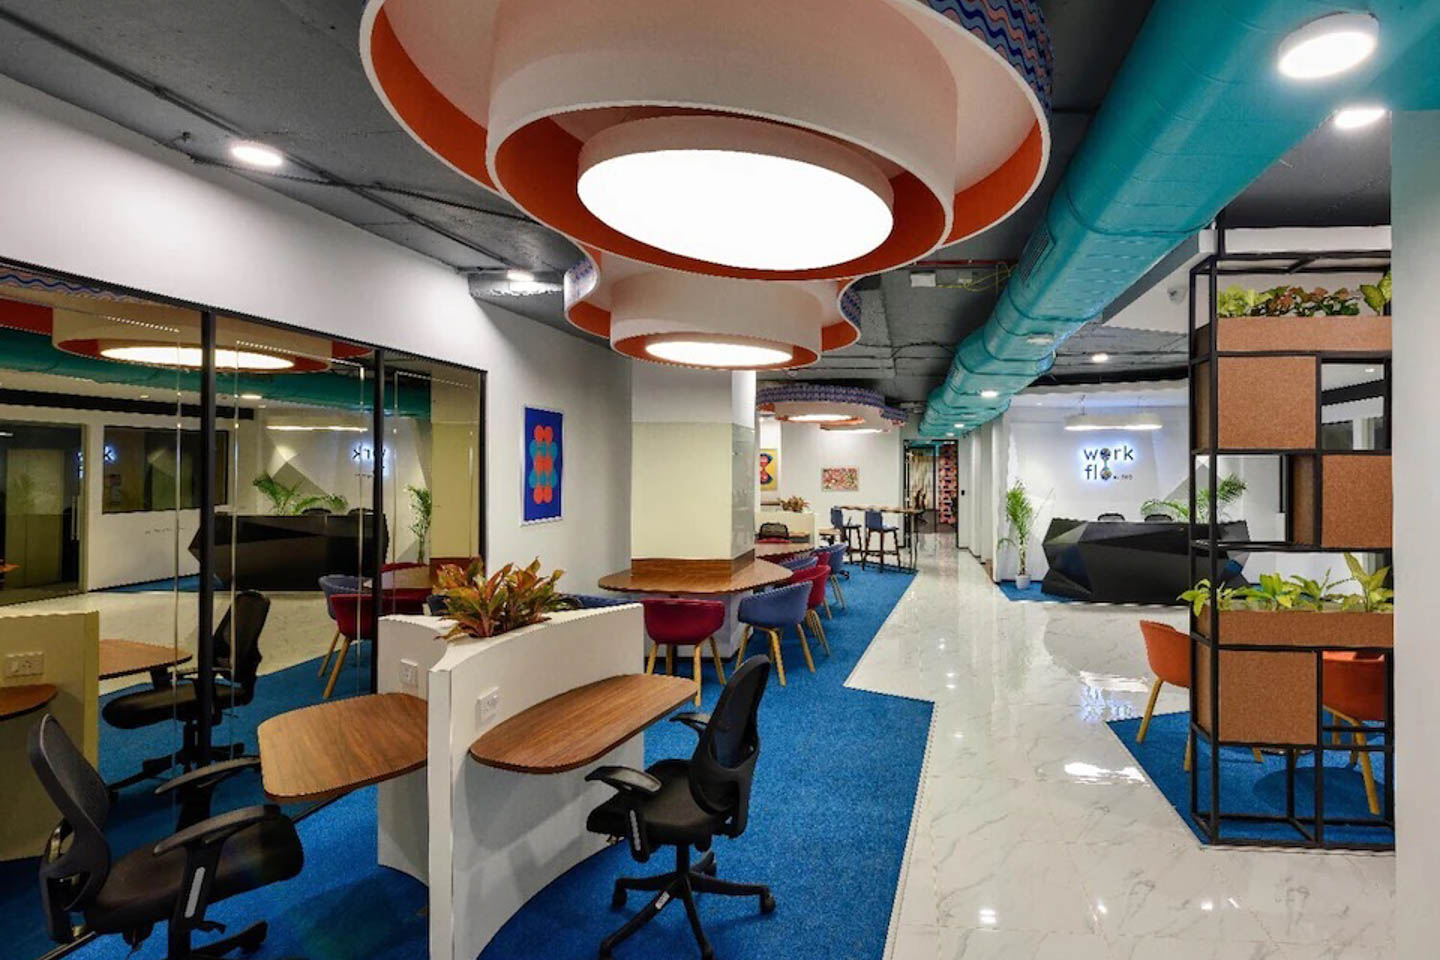 Oyo Workflo Domlur - Coworking Space and Shared Office Space